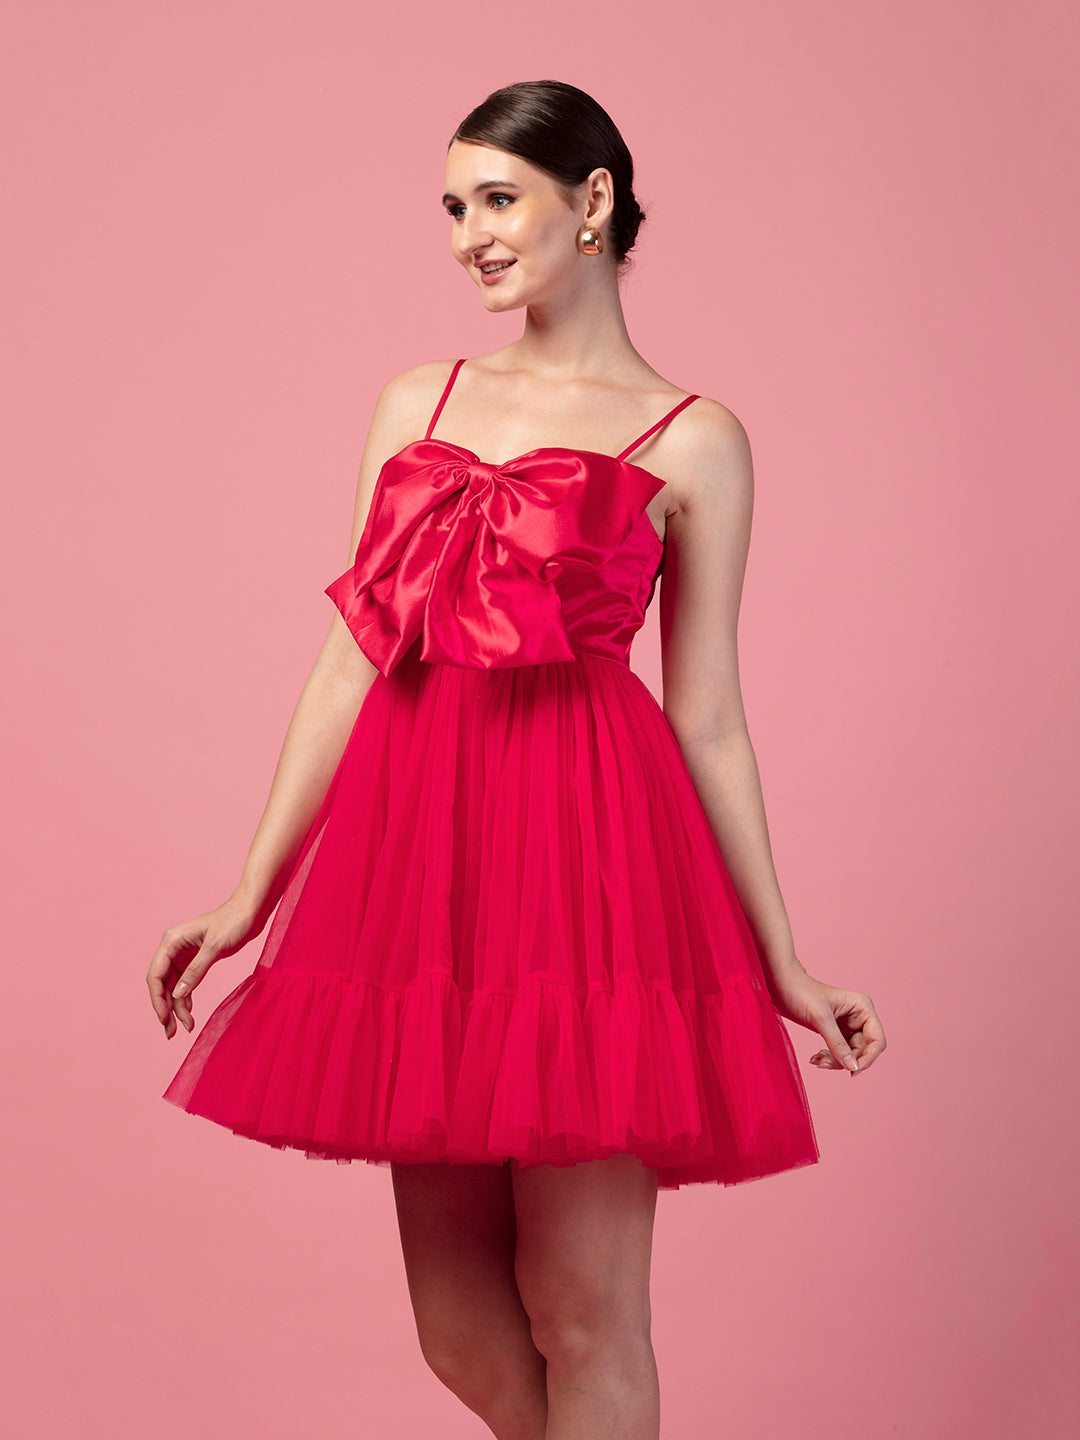 BOW DETAIL TULLE FRILL DRESS